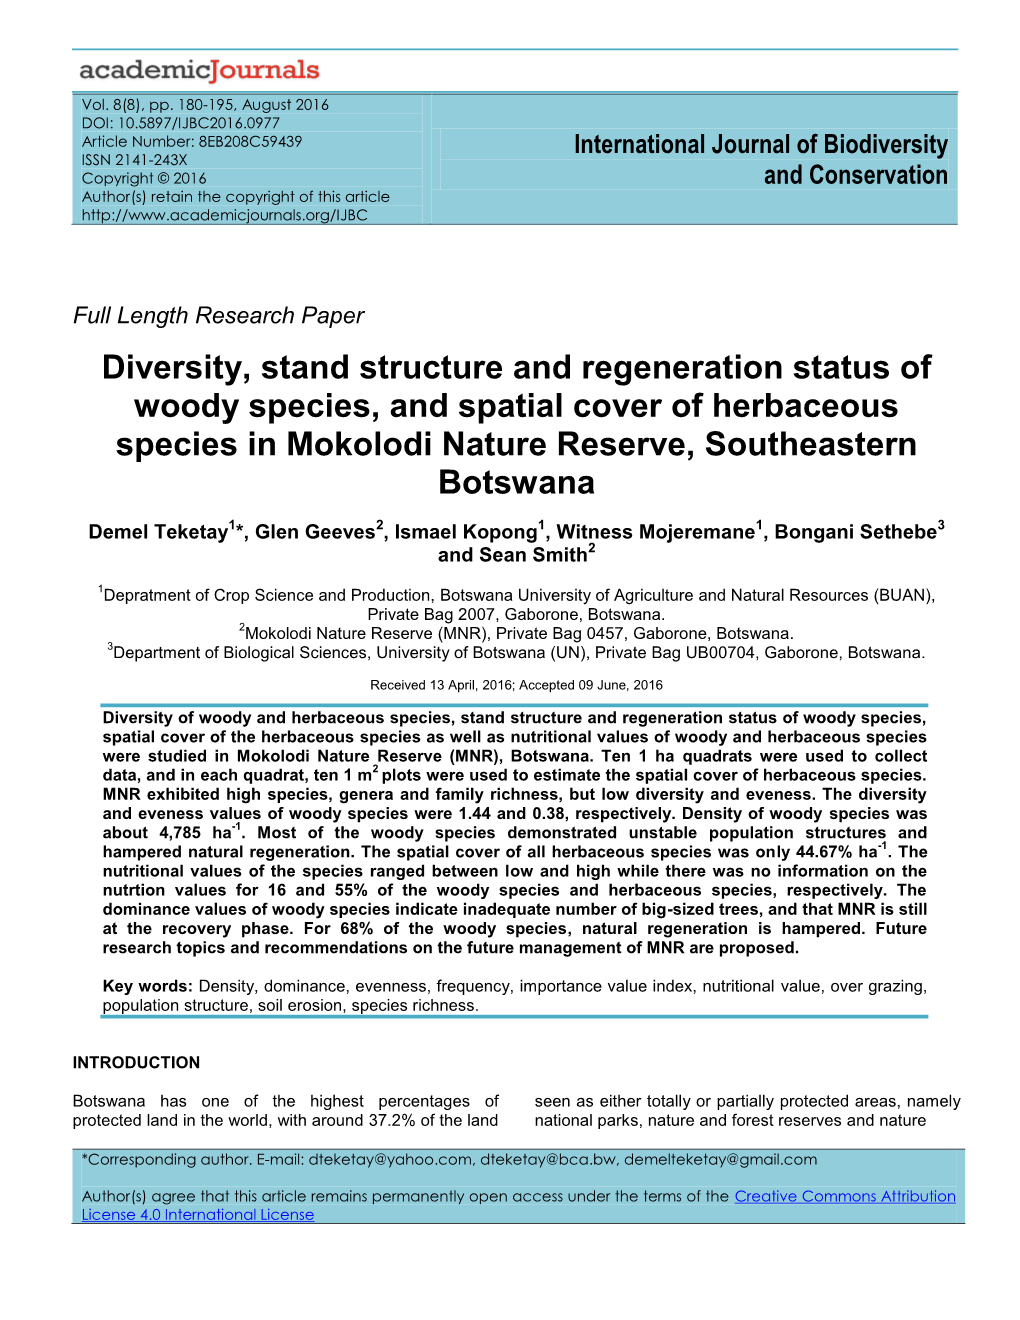 Diversity, Stand Structure and Regeneration Status of Woody Species, and Spatial Cover of Herbaceous Species in Mokolodi Nature Reserve, Southeastern Botswana